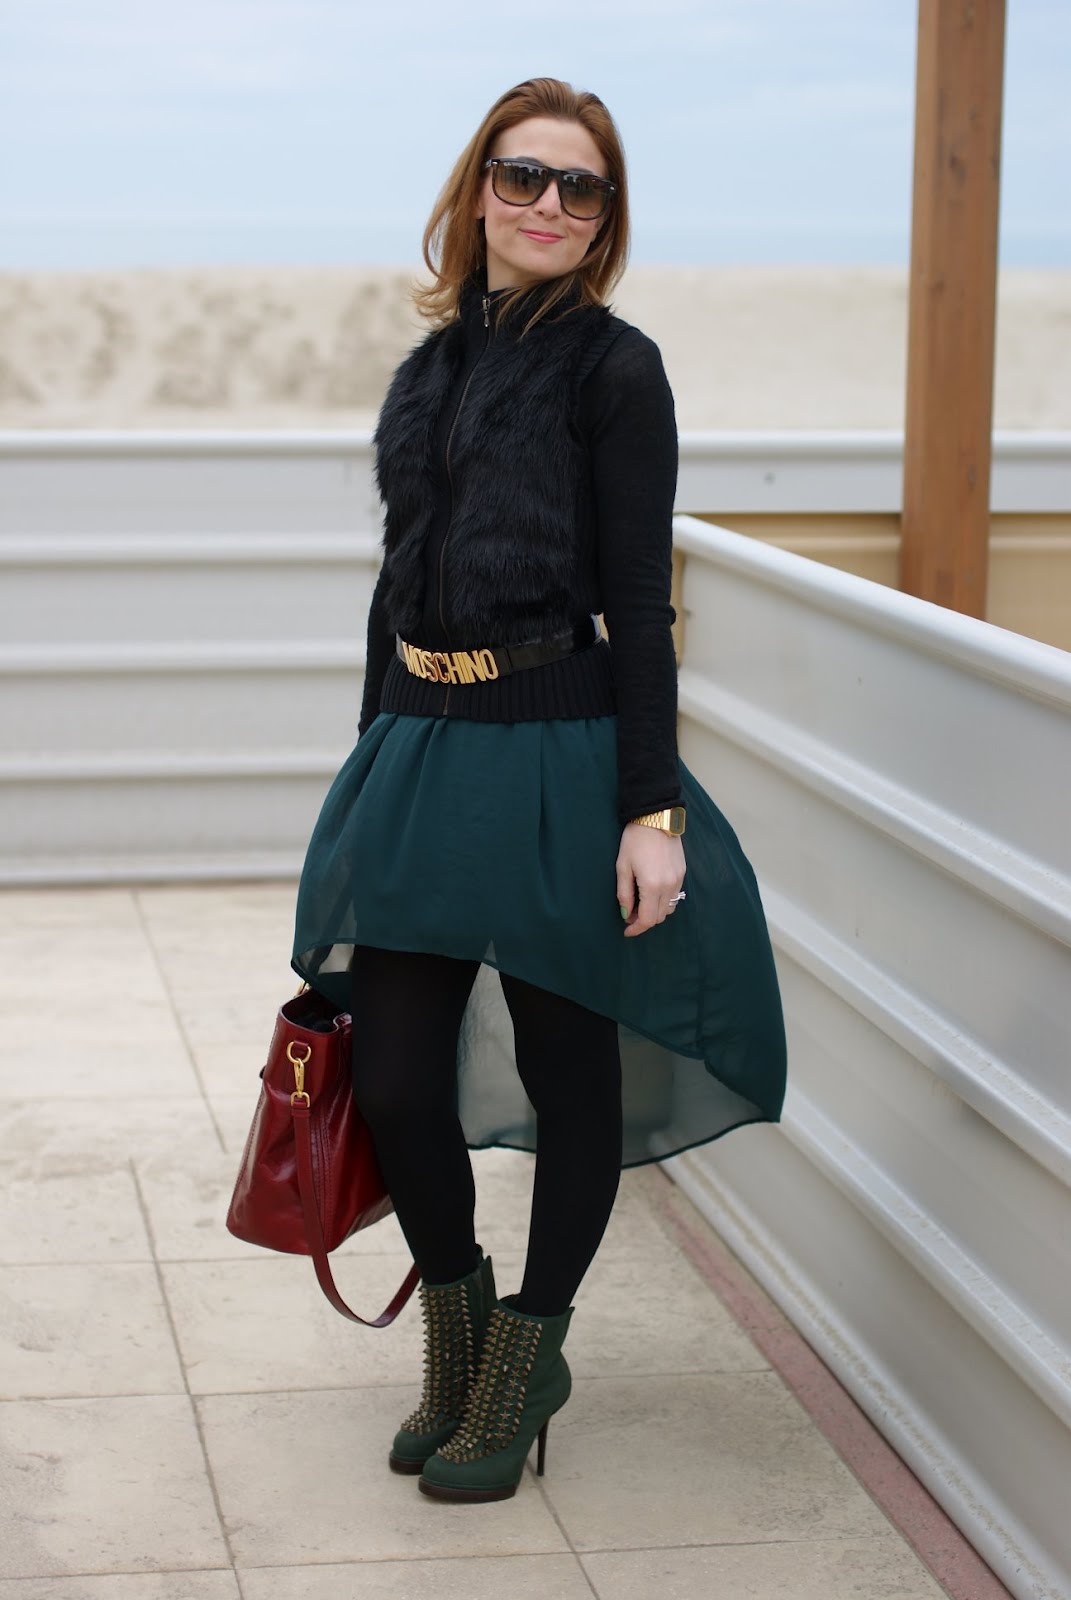 Studded boots, asymmetrical skirt | Fashion and Cookies - fashion and ...